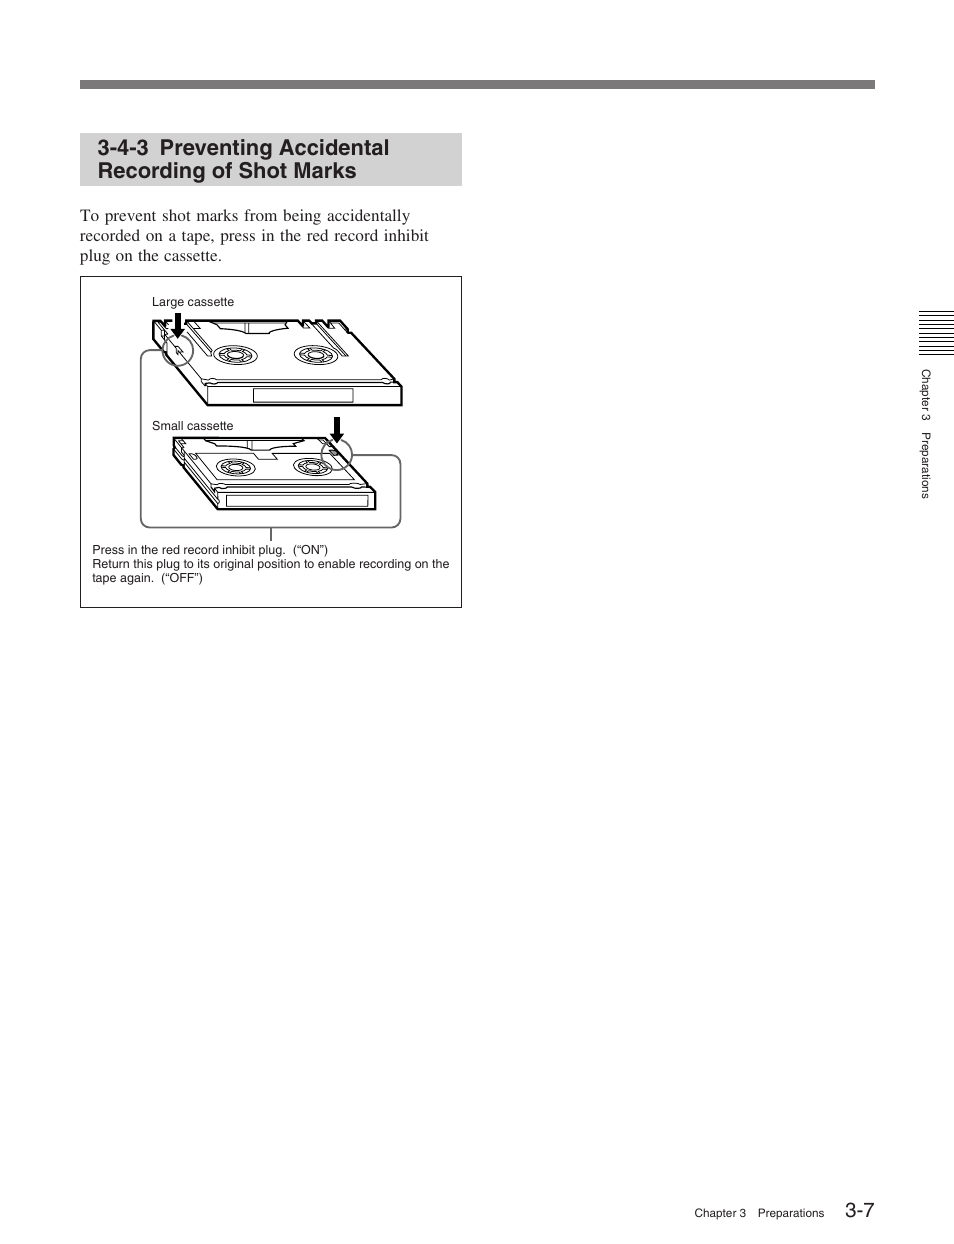 4-3 preventing accidental recording of shot marks | Sony HDW-M2100 User Manual | Page 31 / 115